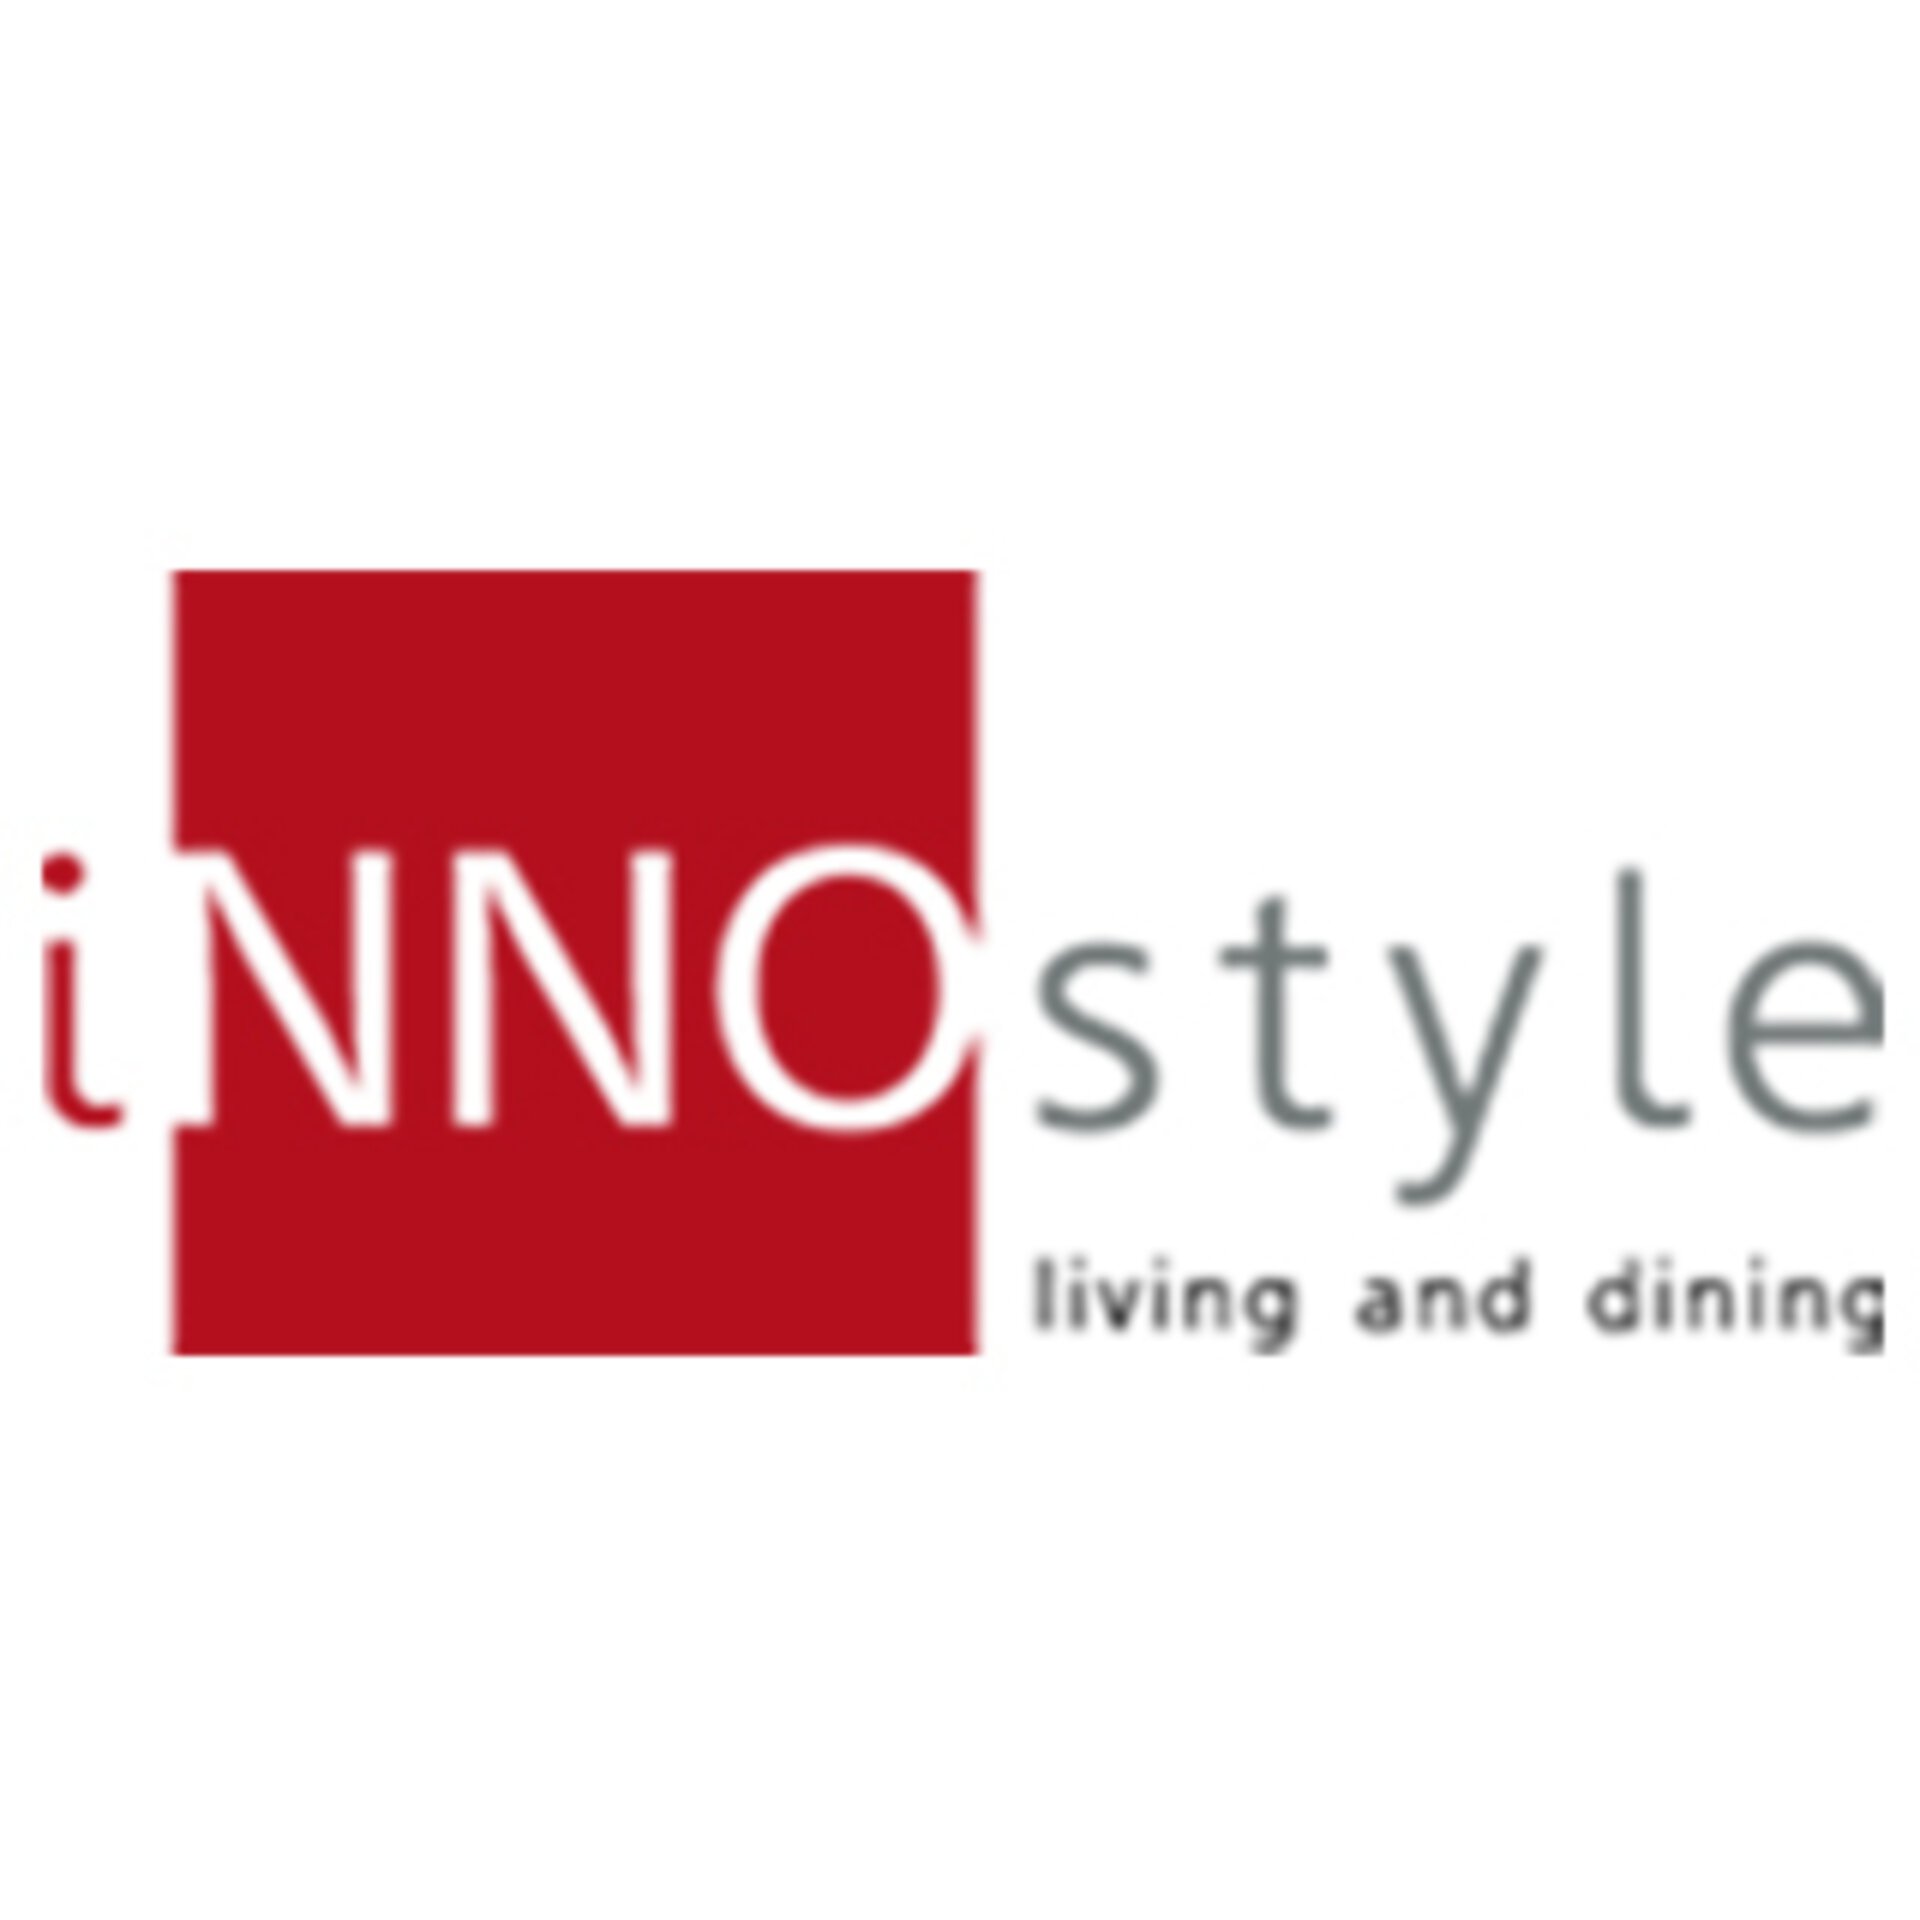 innostyle - living and dining Logo